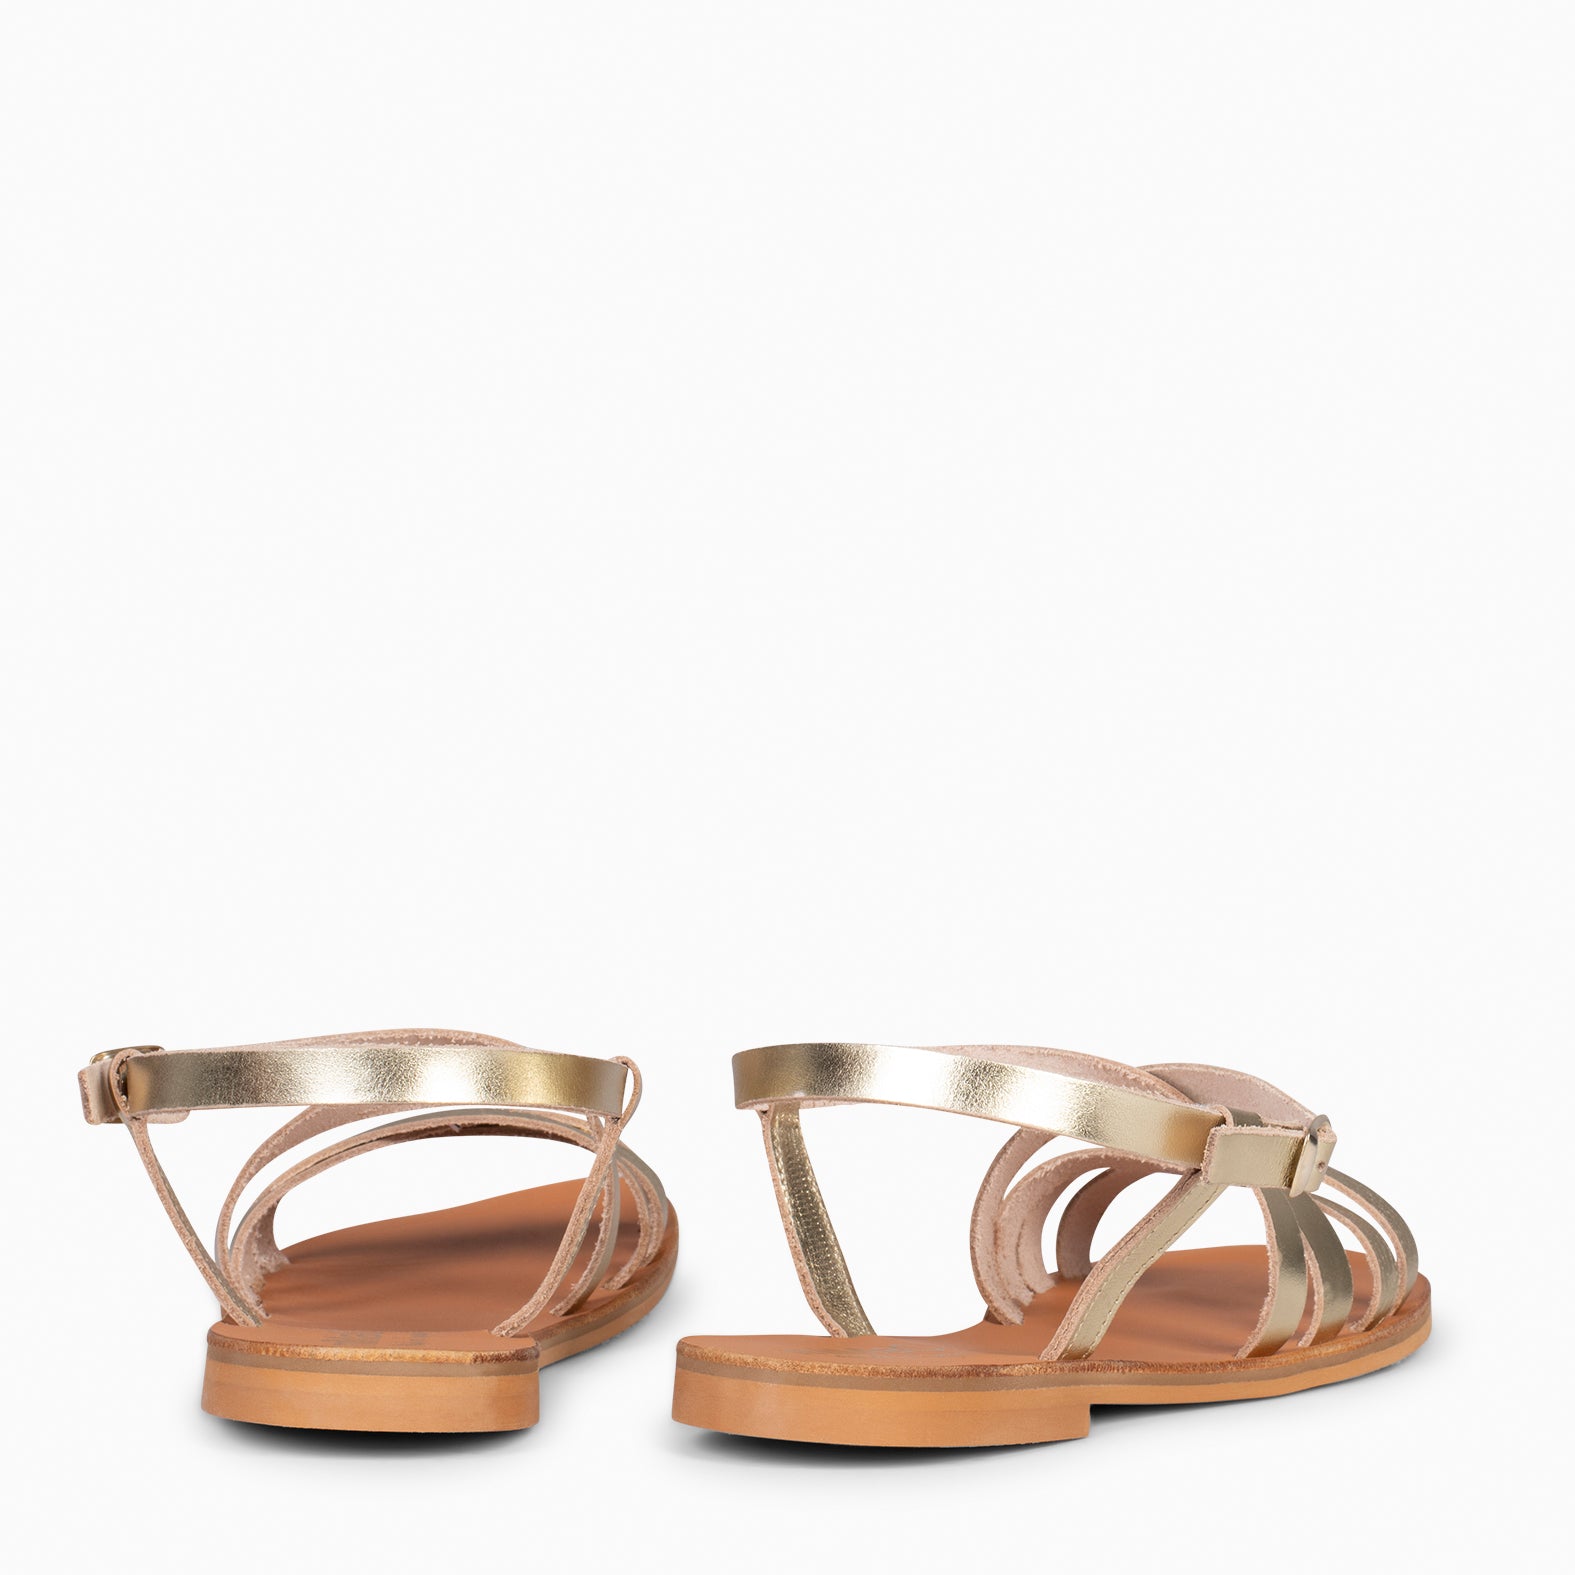 IXORA – GOLD flat sandals with buckle